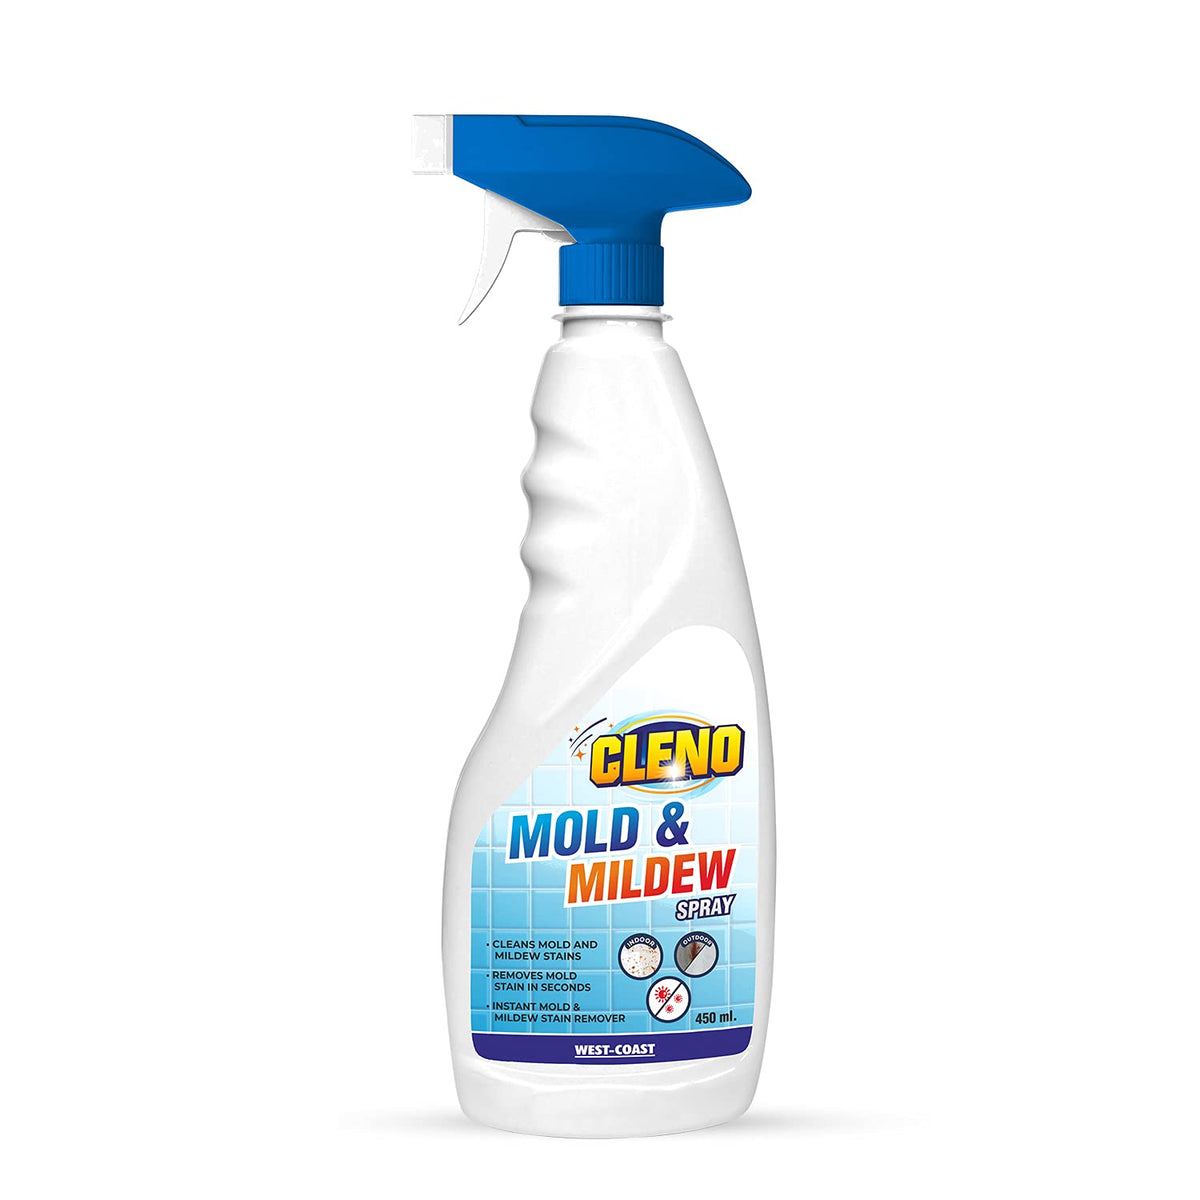 Cleno Mold & Mildew Cleaner Spray Cleans Stains, Bath Tubs, Wash Basin, Hard Surfaces, Walls, Bathroom Tiles, Silicone Sealant, Sinks & Plugholes - 450 ml (Ready to Use)